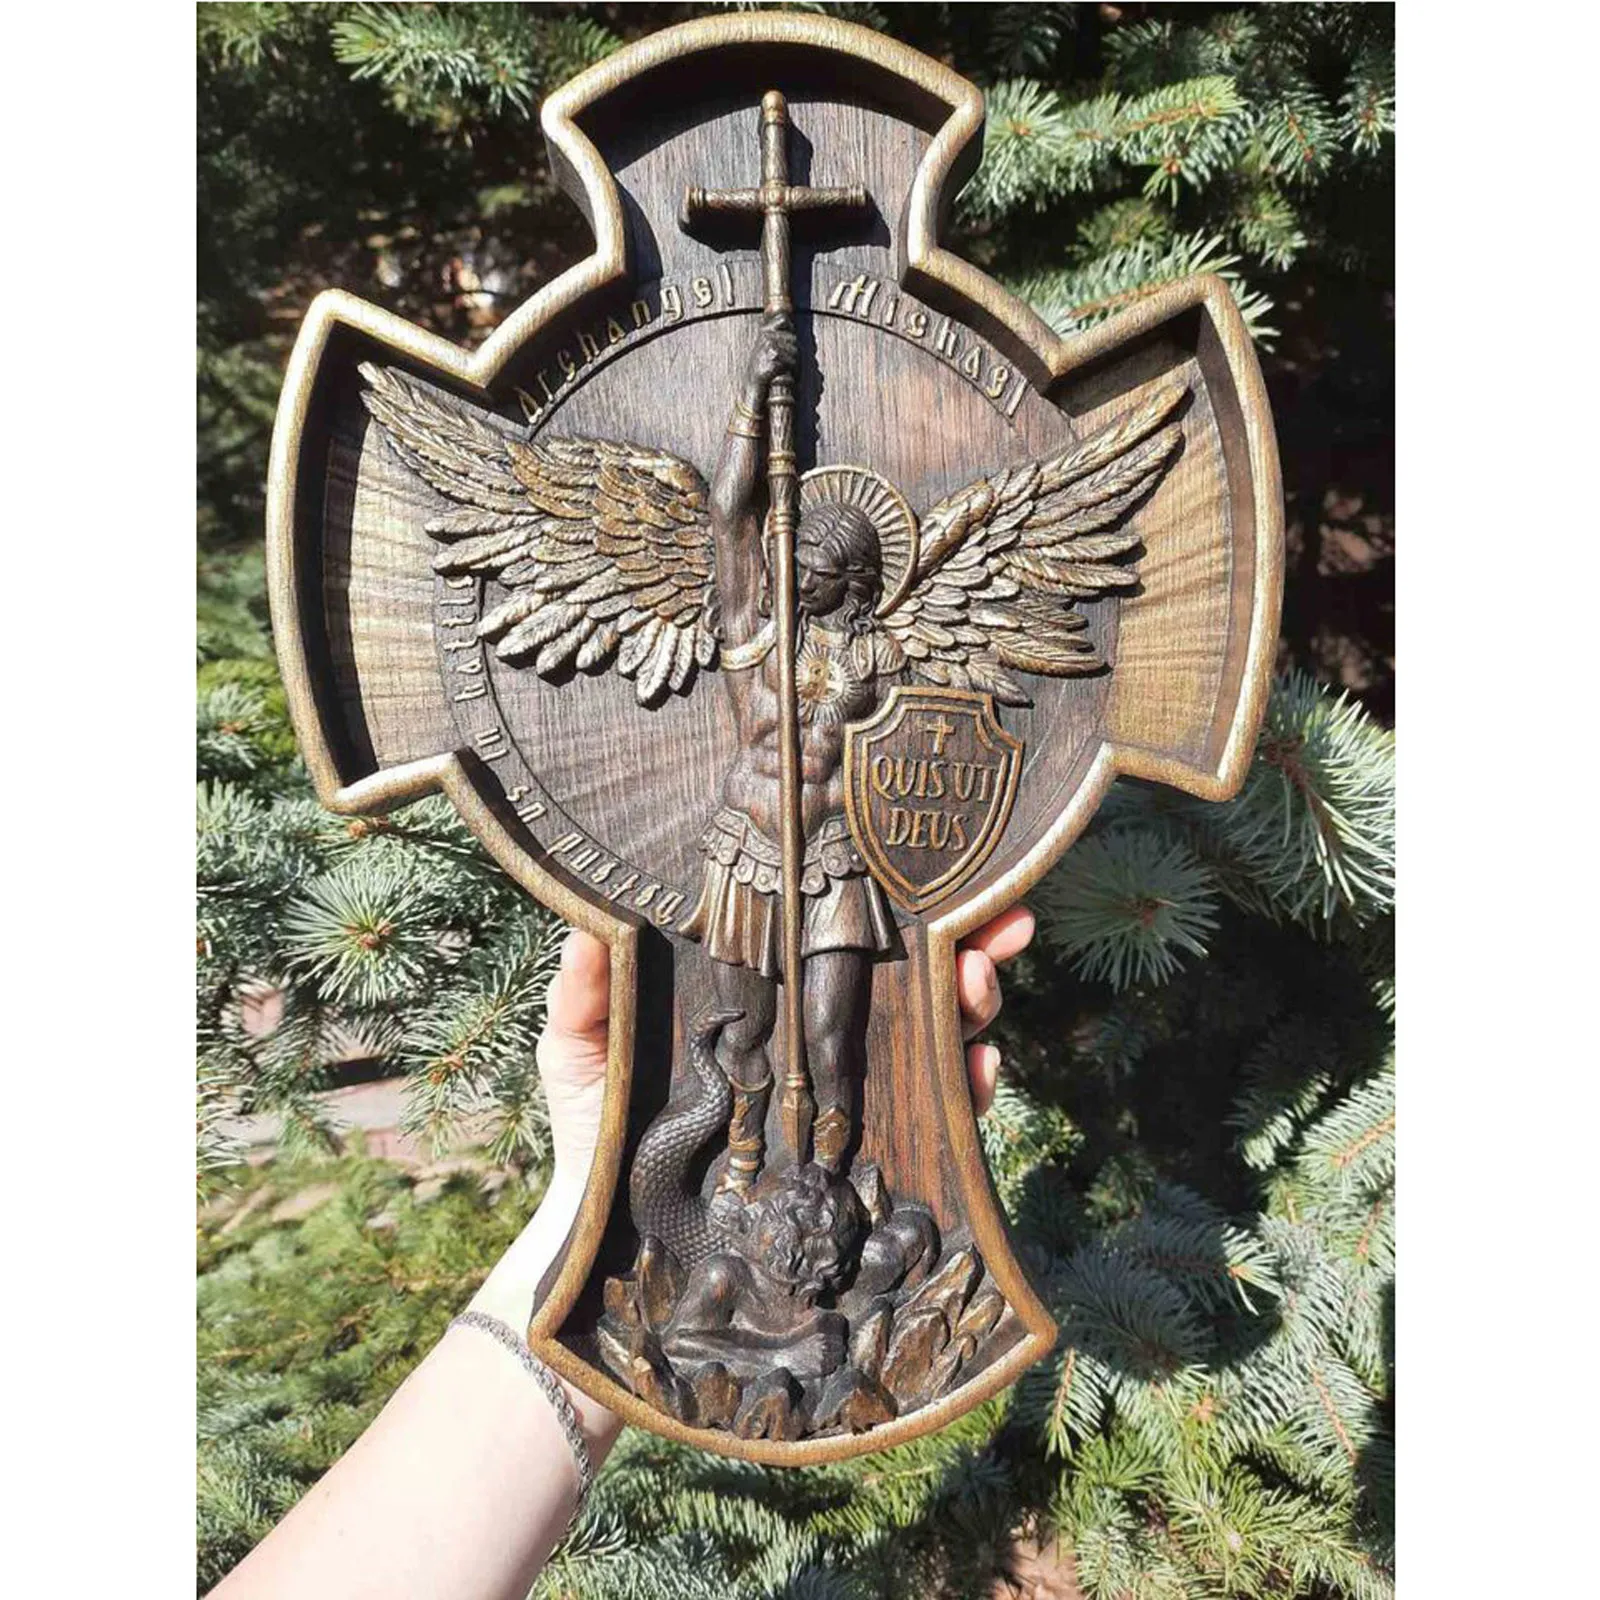 

Archangel Michael Solid Wood Carving Gift Hand Carved From A Whole Piece Of Wood Gift for Him Housewarming Gift Home Garden